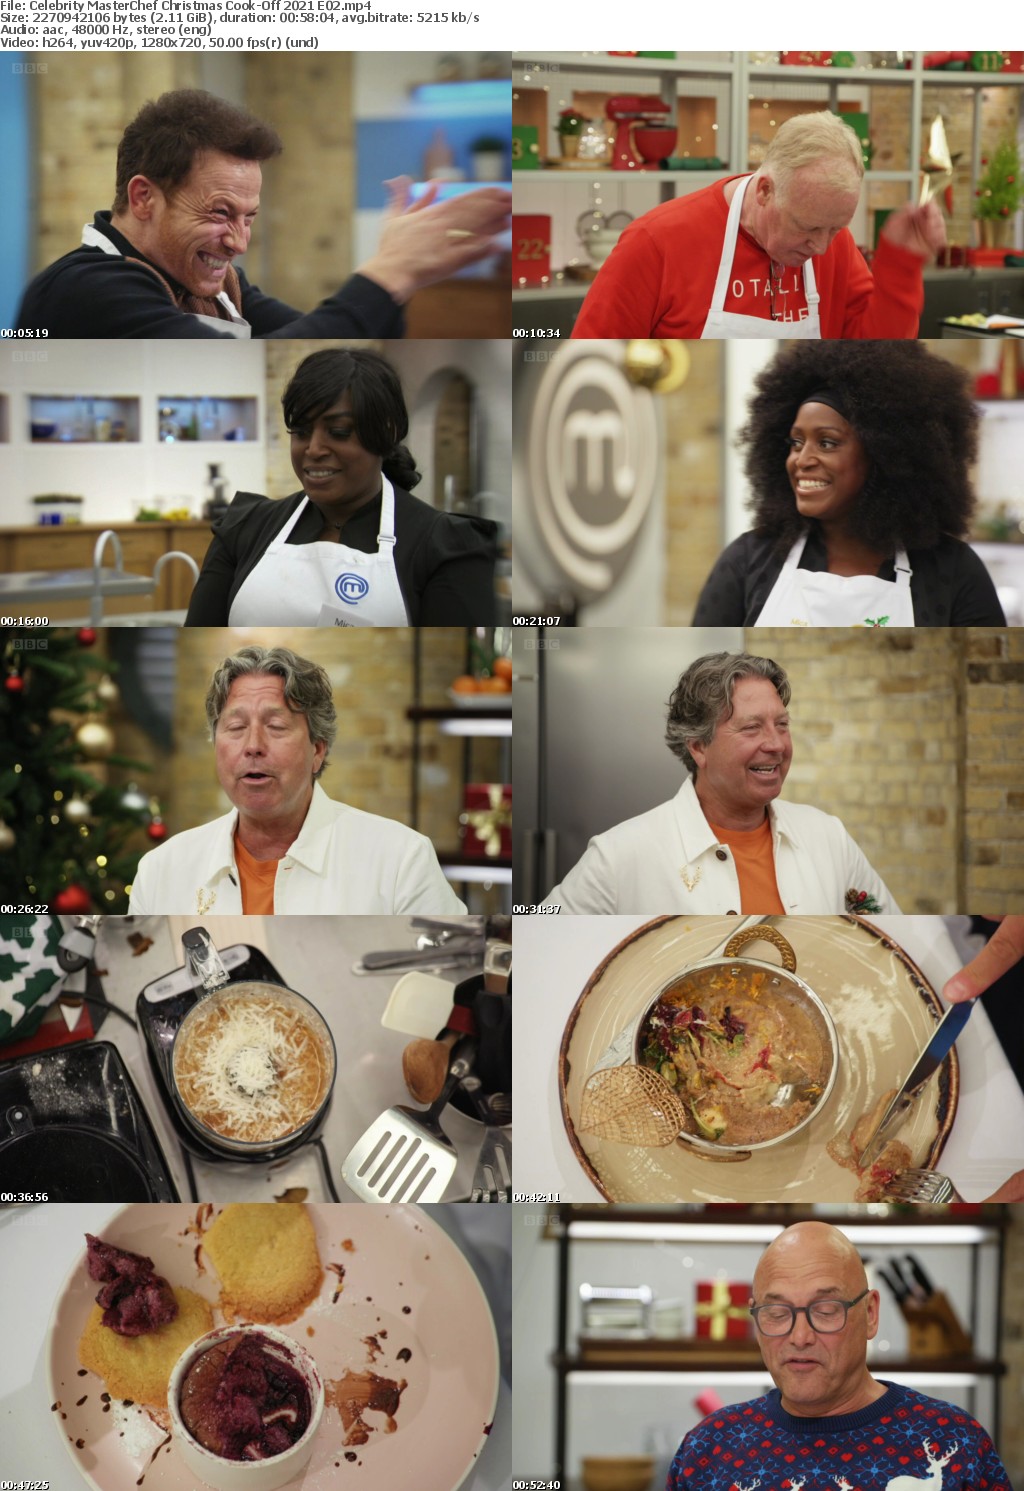 Celebrity MasterChef Christmas Cook-Off 2021 (1280x720p HD, 50fps, soft Eng subs)